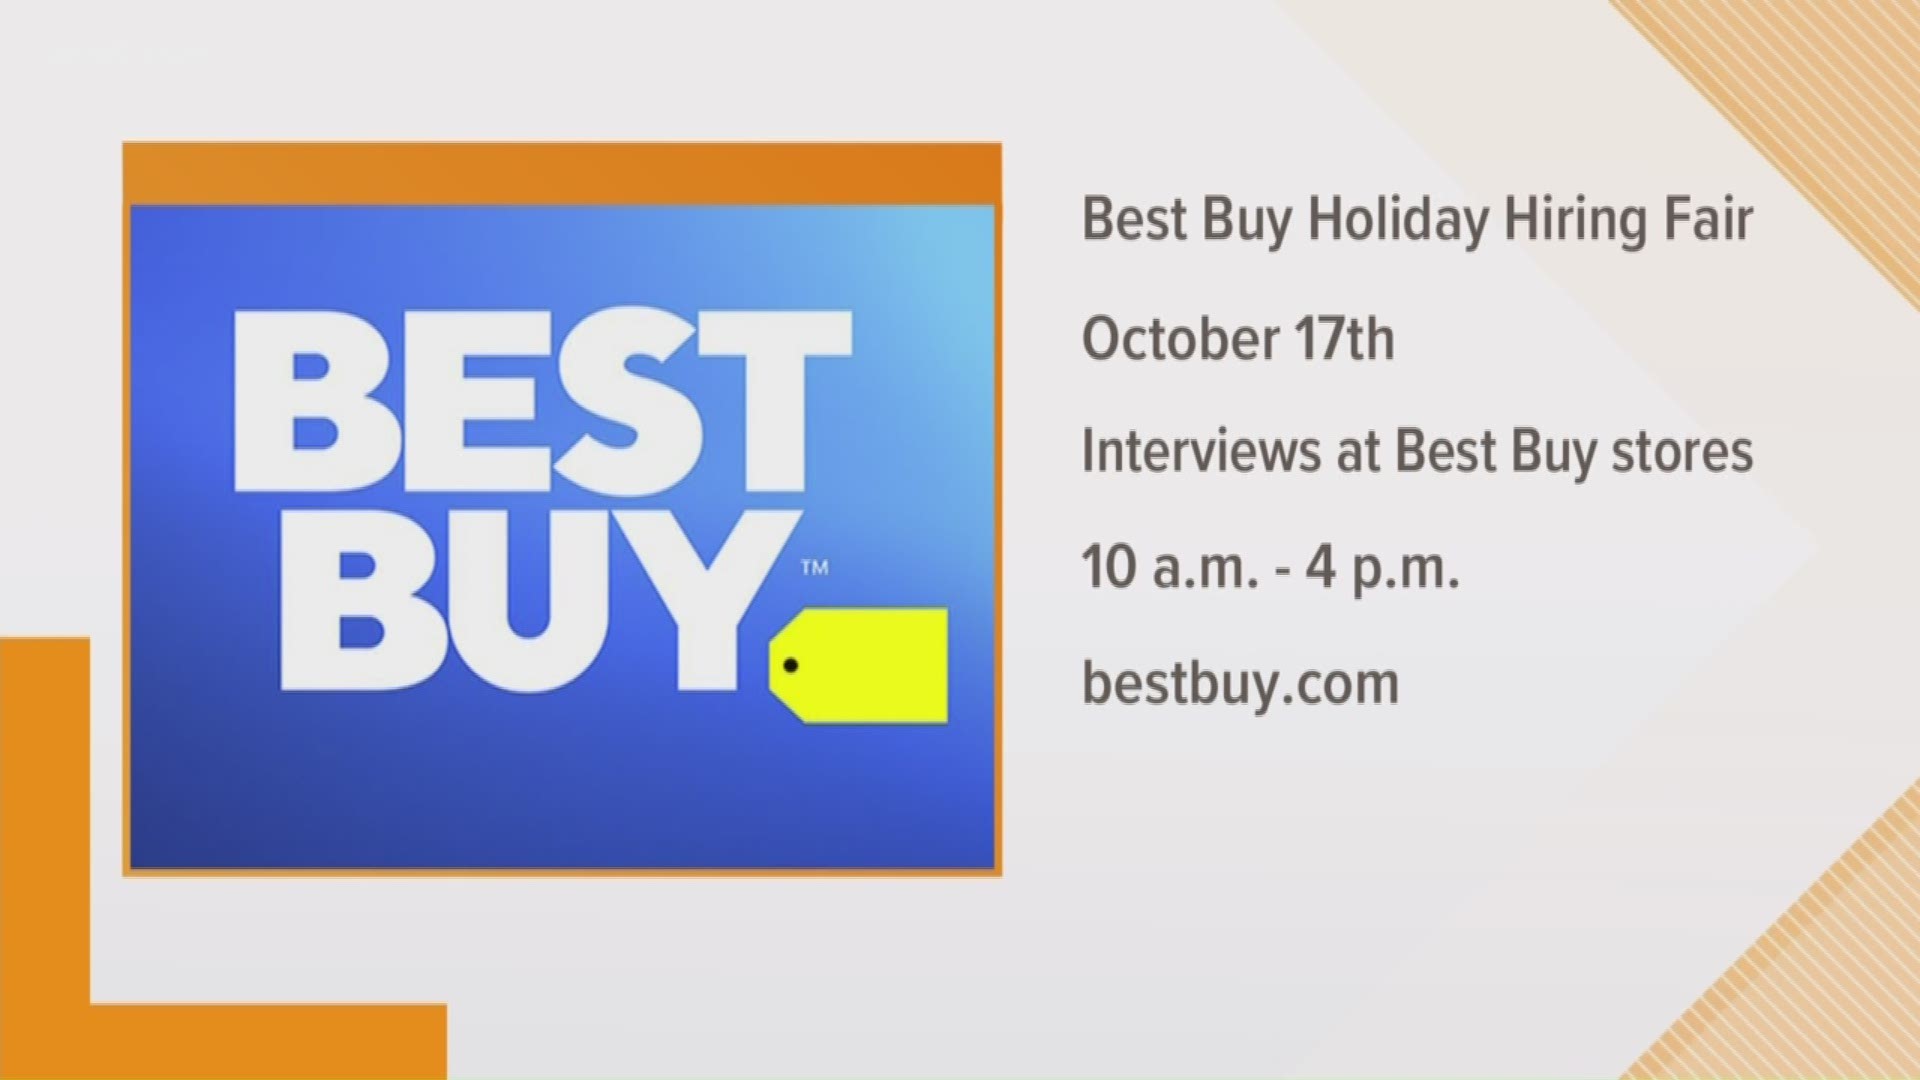 All Best Buy stores will host hiring events with interviews taking place the same day.